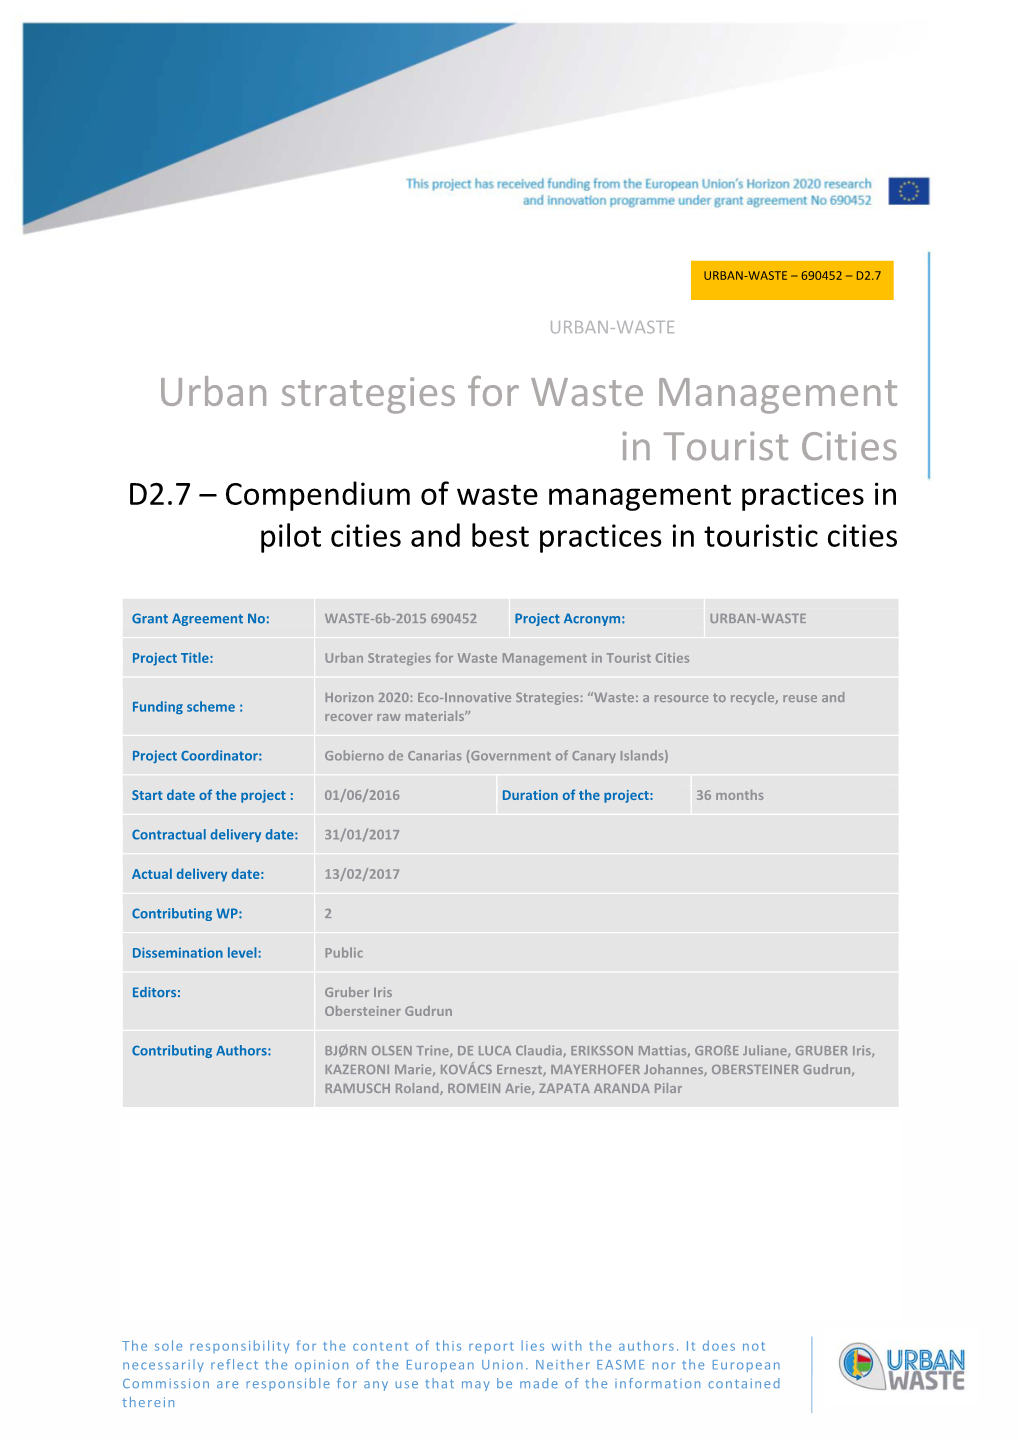 Urban Strategies for Waste Management in Tourist Cities D2.7 – Compendium of Waste Management Practices in Pilot Cities and Best Practices in Touristic Cities